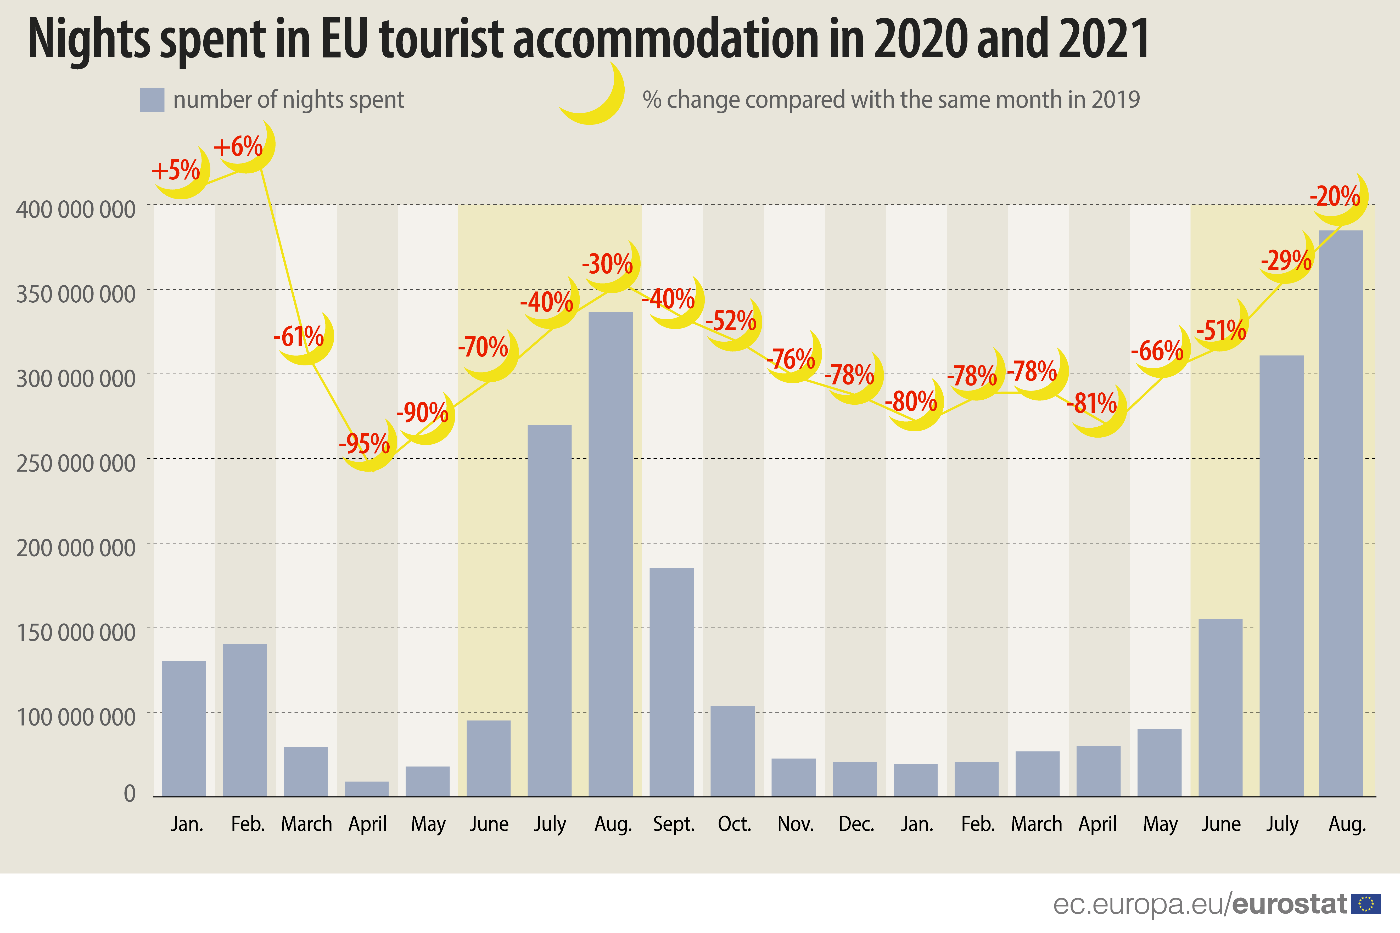 Bar graph with a stacked line: Nights spent in EU tourist accommodation in 2020 and 2021, with the bars showing the number of nights spent and the stacked line showing the % change compared with the same montg in 2019.